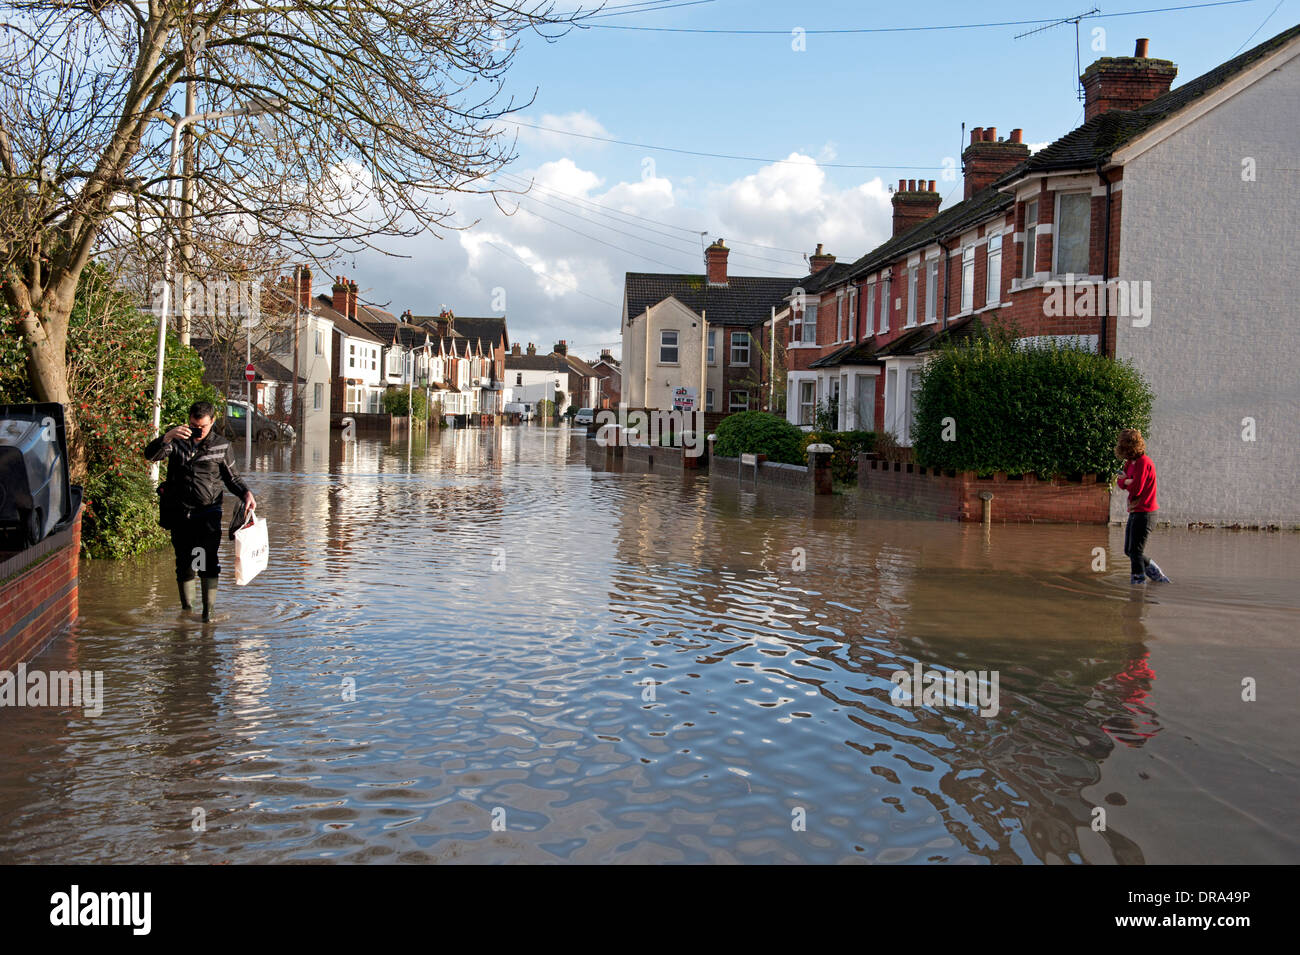 Flooding in Tonbridge, Kent, UK caused by the River Medway overflowing Stock Photo